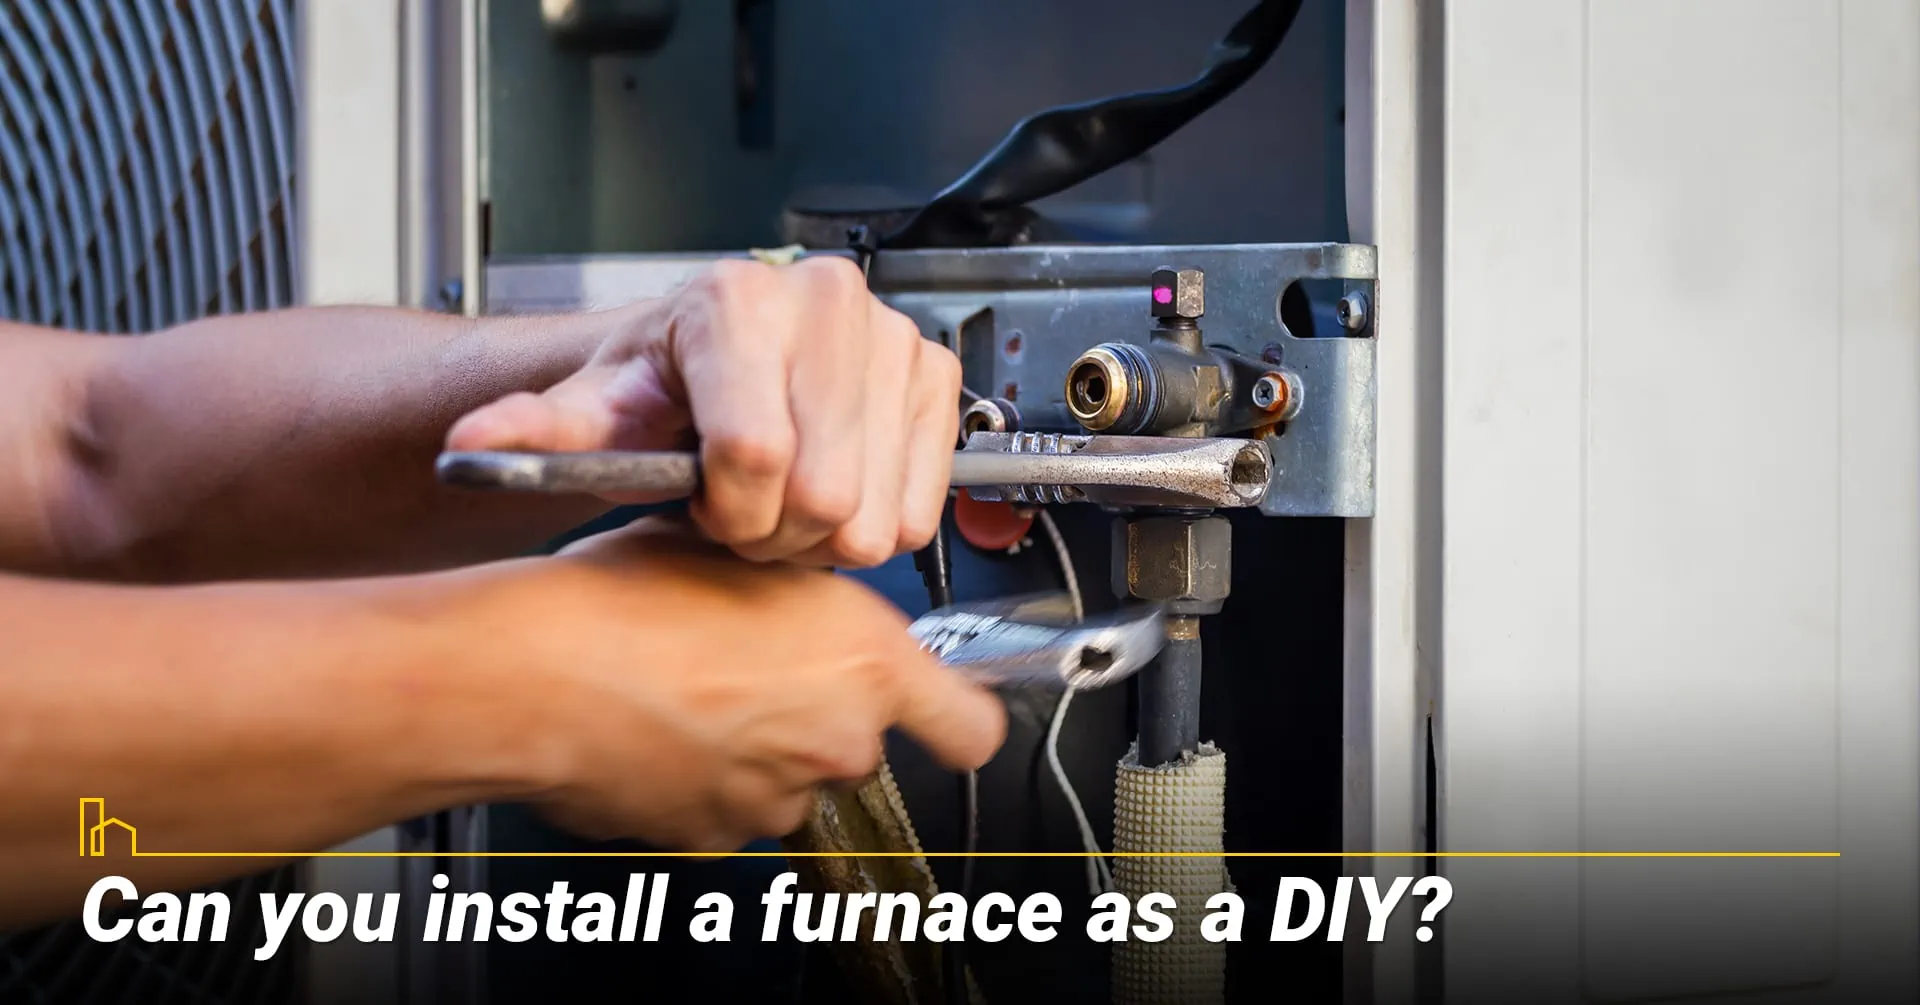 3. Can you install a furnace as a DIY?